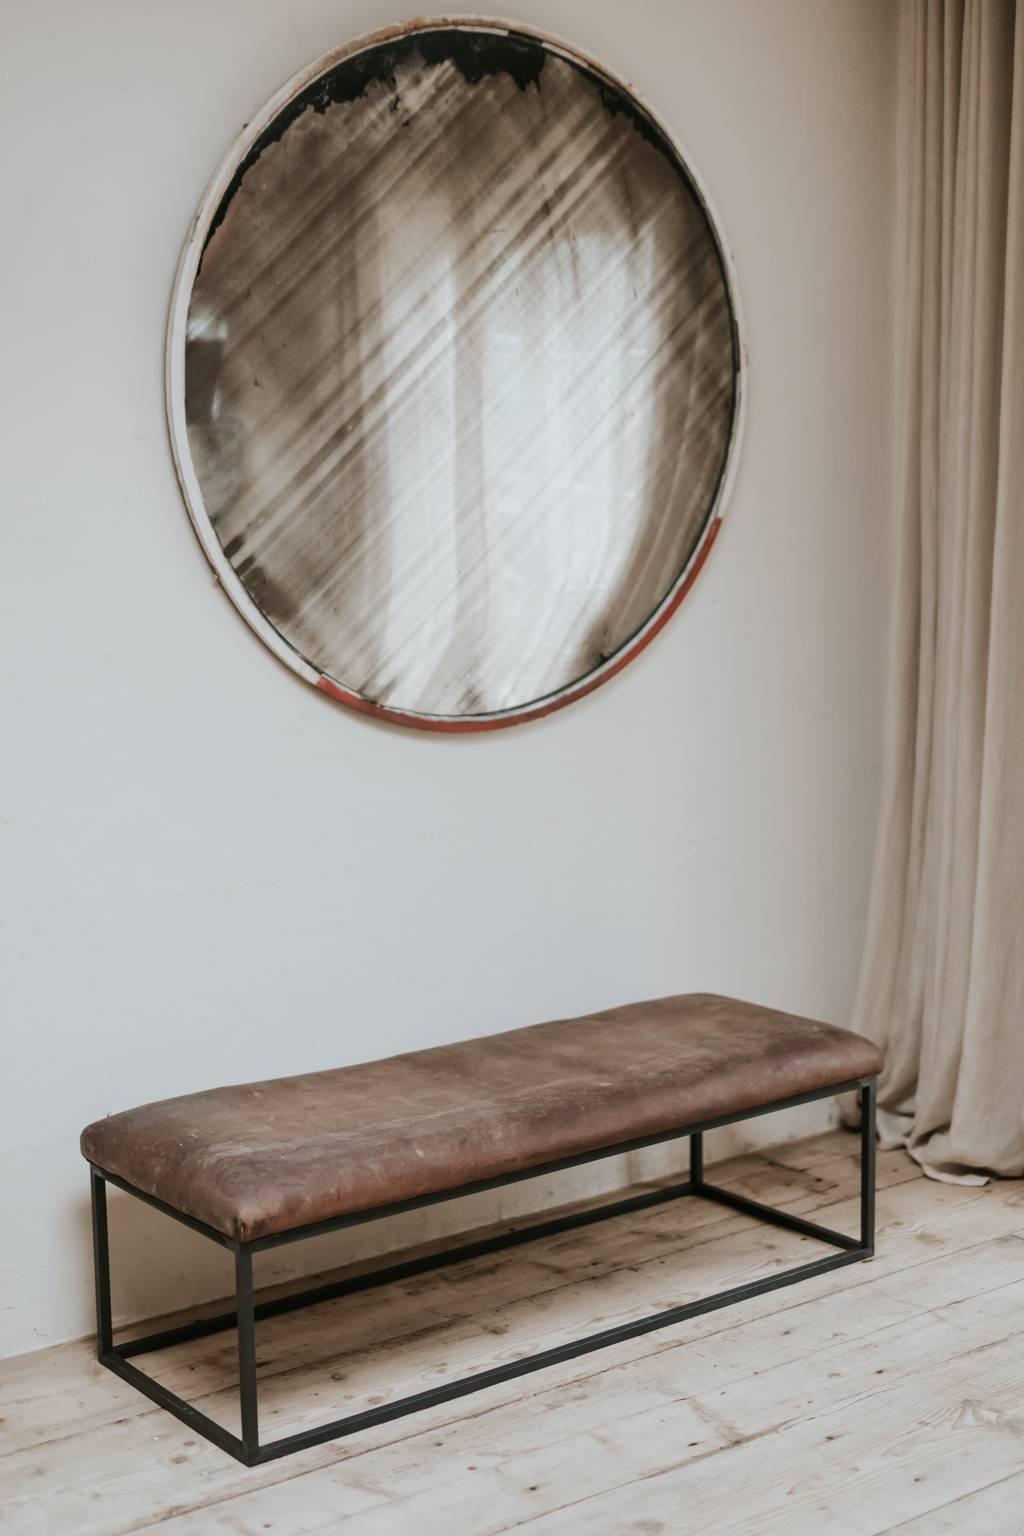 These leather topped coffee tables made of old leather and put in contemporary iron base can be used everywhere, make wonderful bed ends, reading benches in front of a window or coffee tables.
 